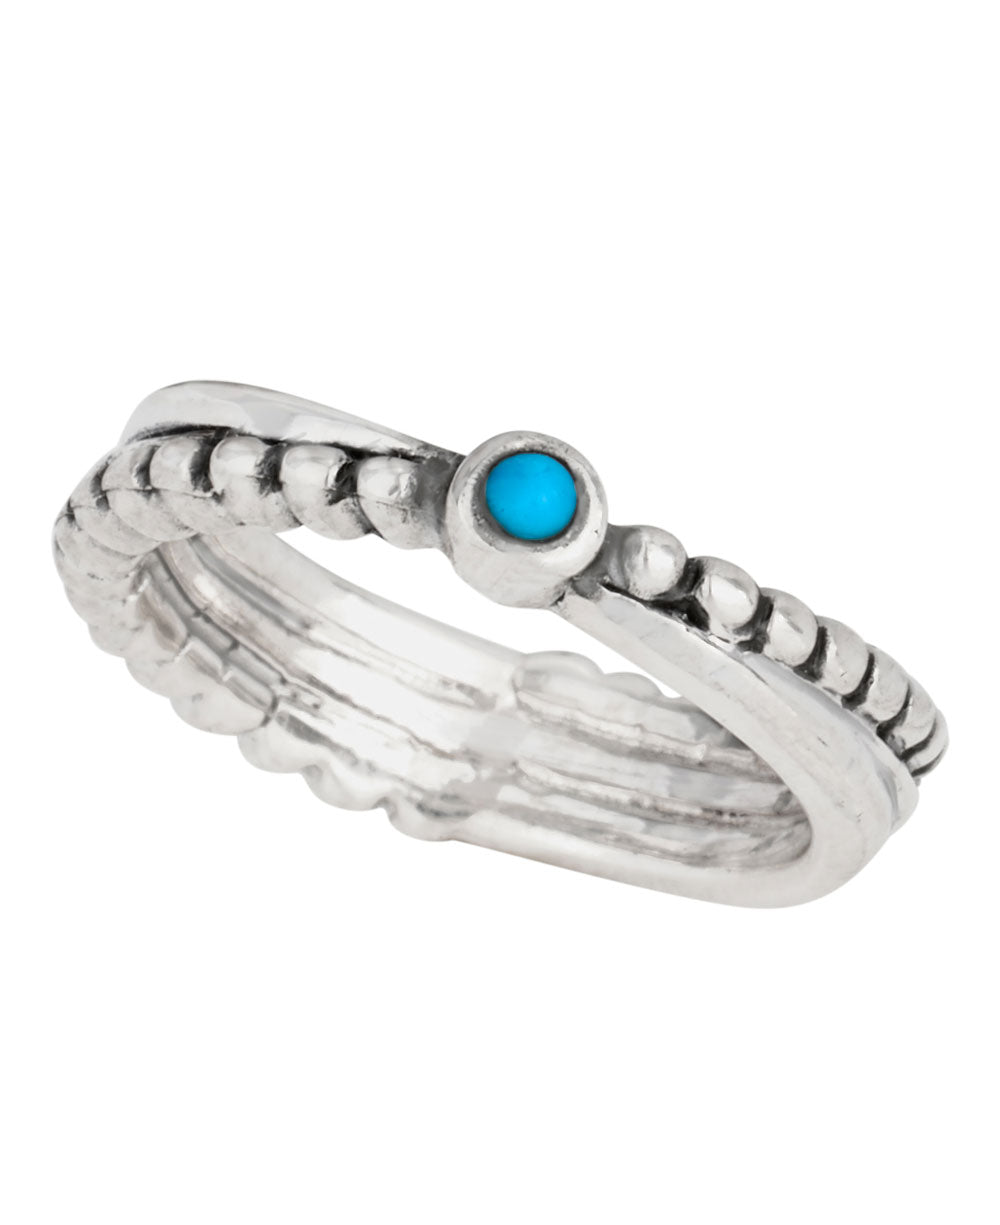 Turquoise Sterling Silver Ring 